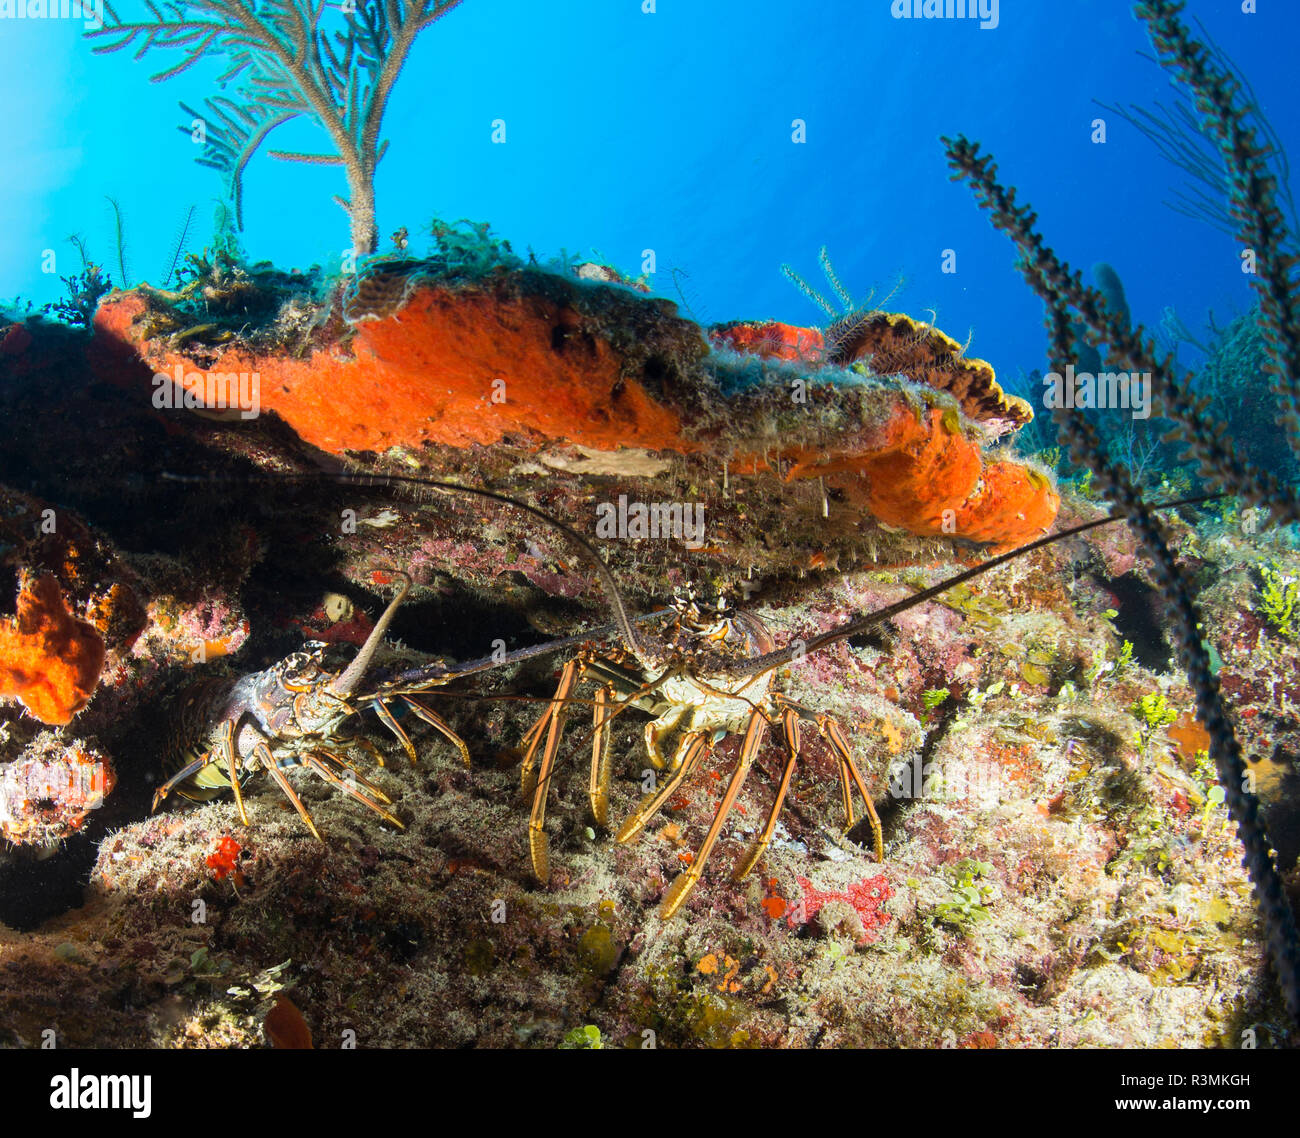 Pair of spiny lobsters are seen in a coral ledge along the north coast of Cuba. Stock Photo